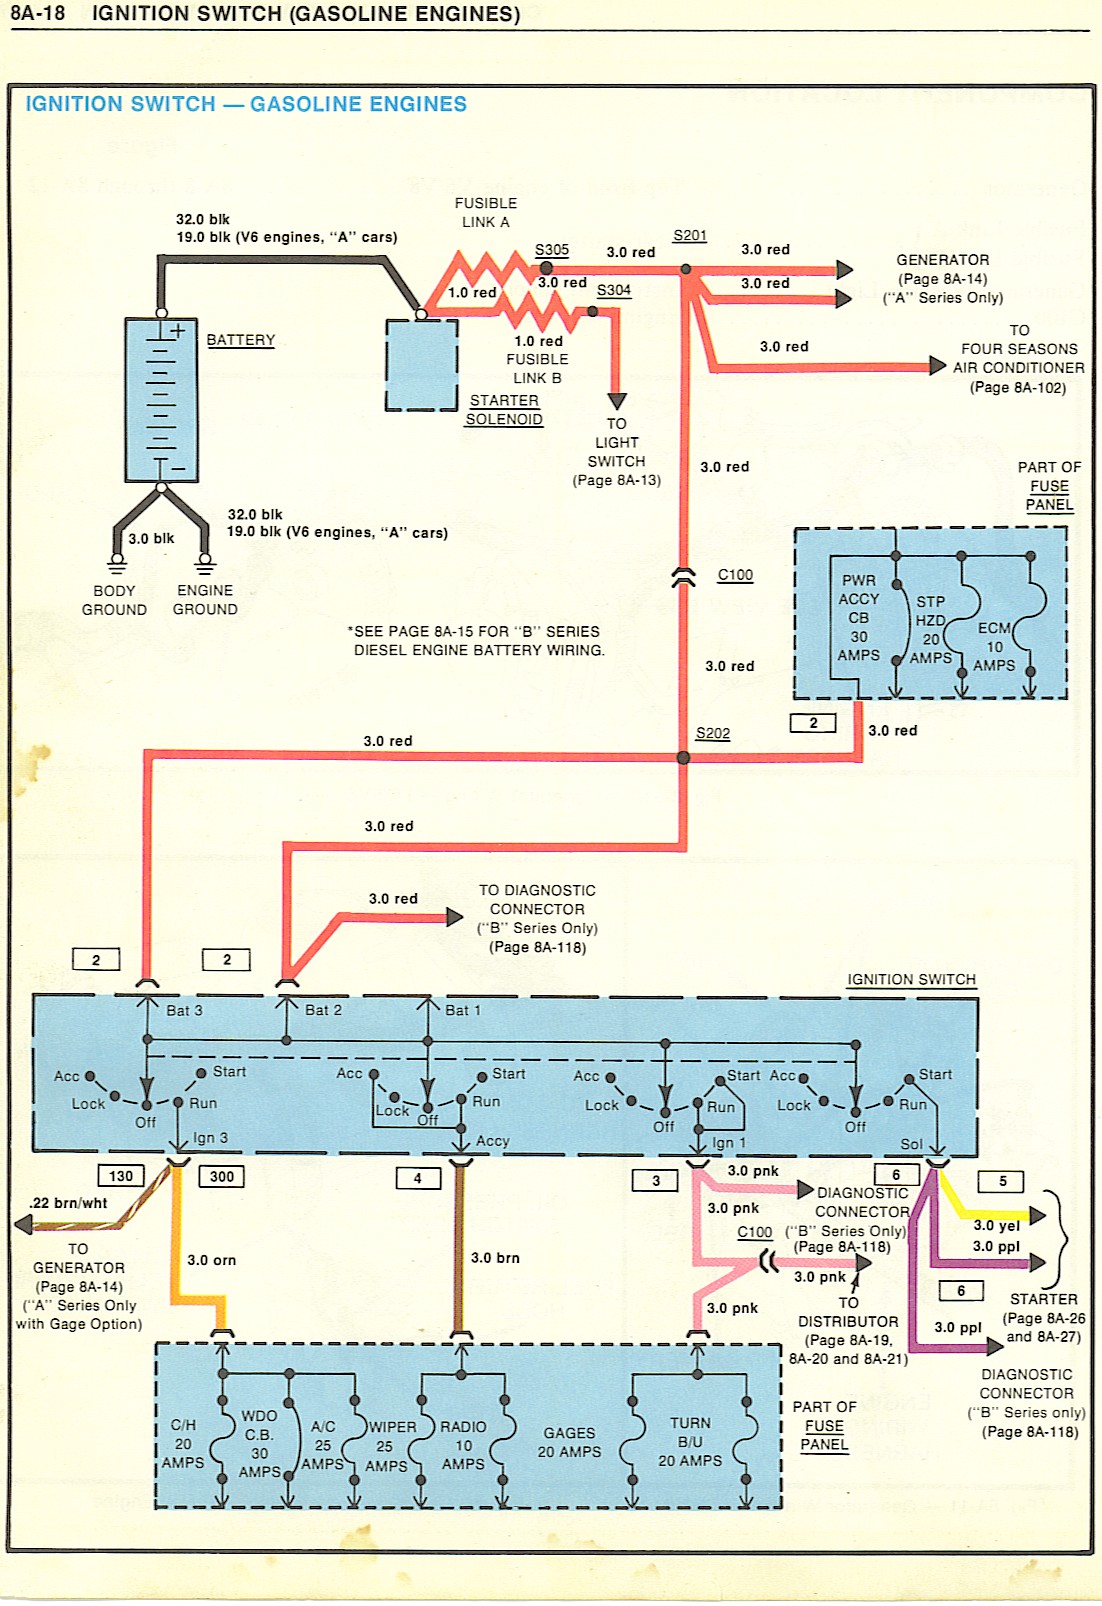 1967 Chevrolet Camaro Engine Compartment Wiring Diagram from www.maliburacing.com